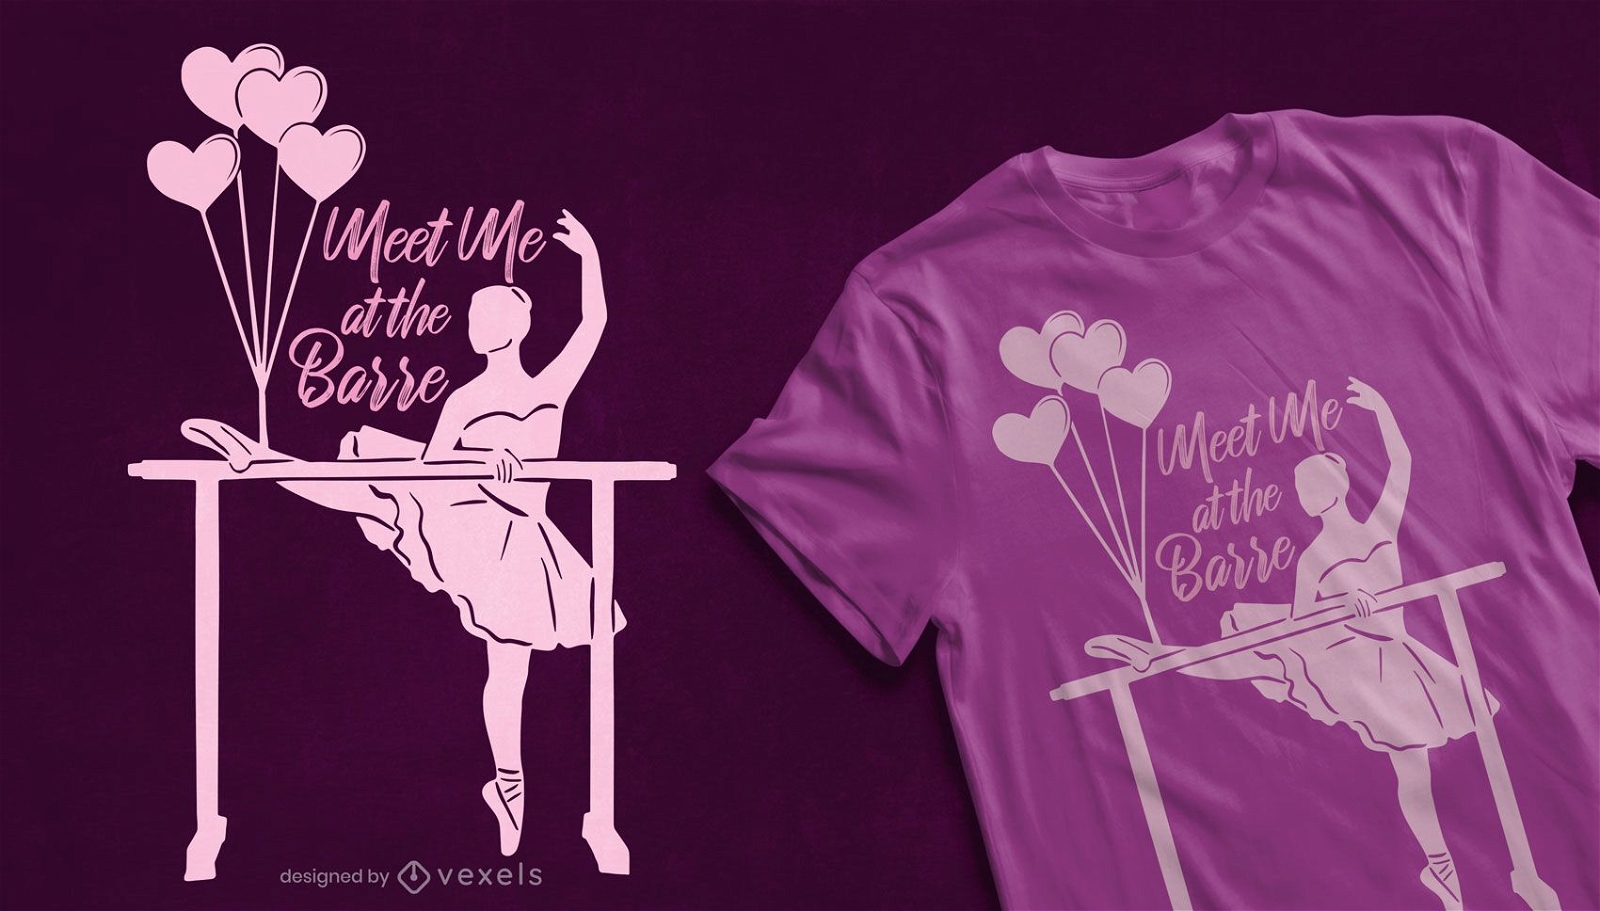 At the barre t-shirt design